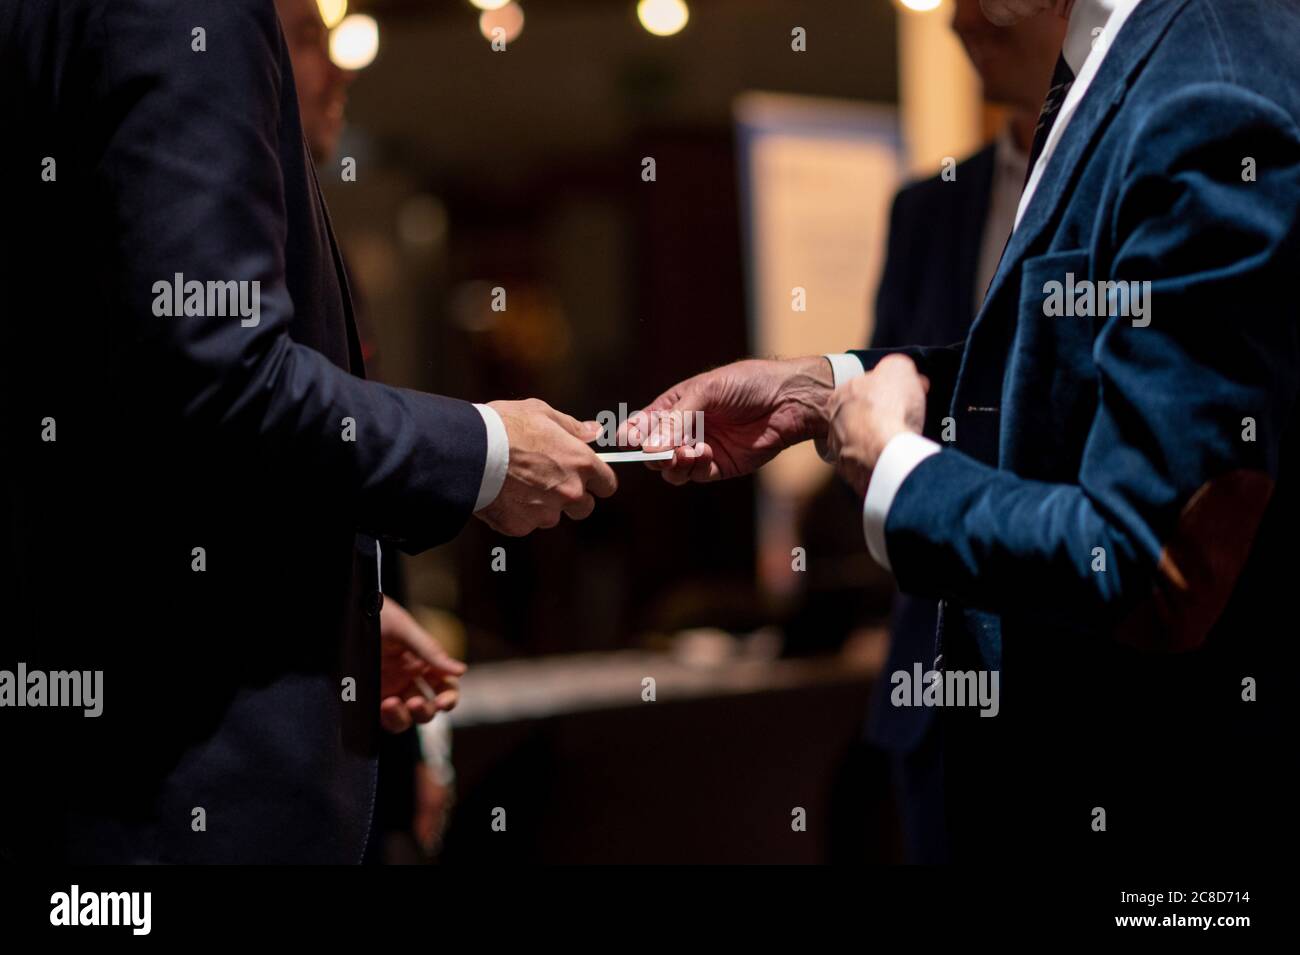 Exchange Business Cards at a Meeting Event Stock Photo